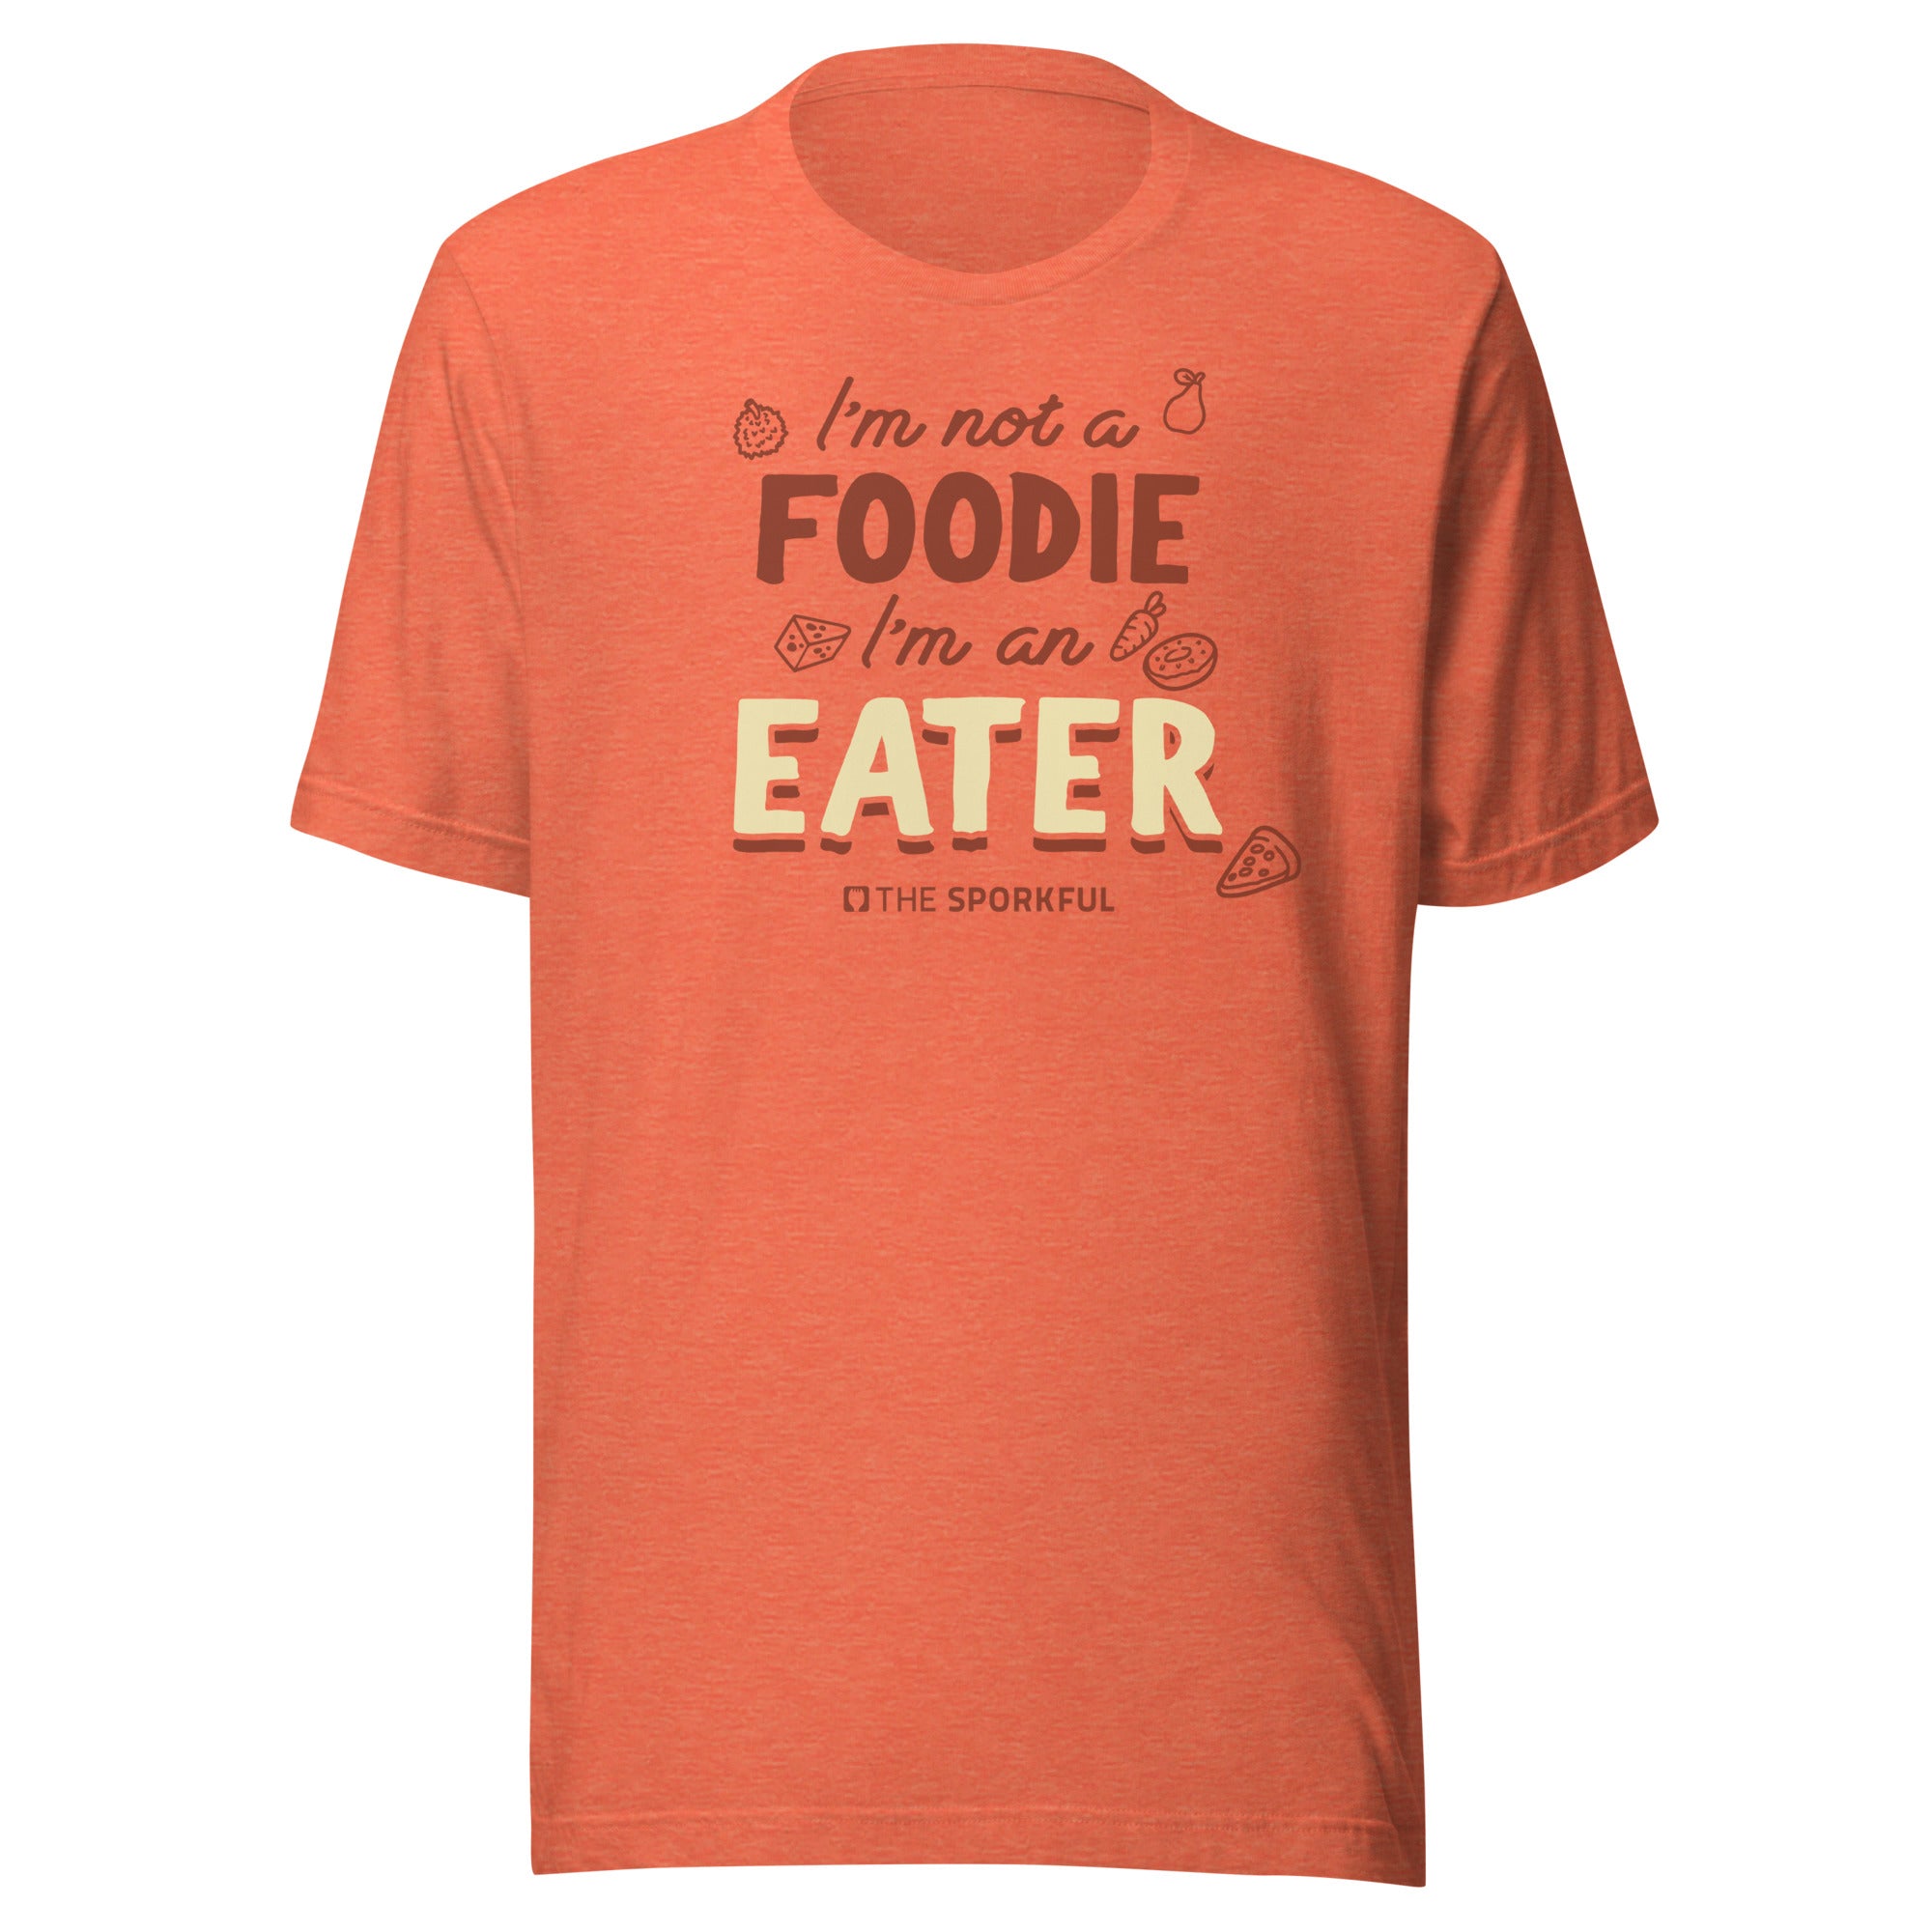 The Sporkful: I'm Not A Foodie I'm An Eater T-shirt